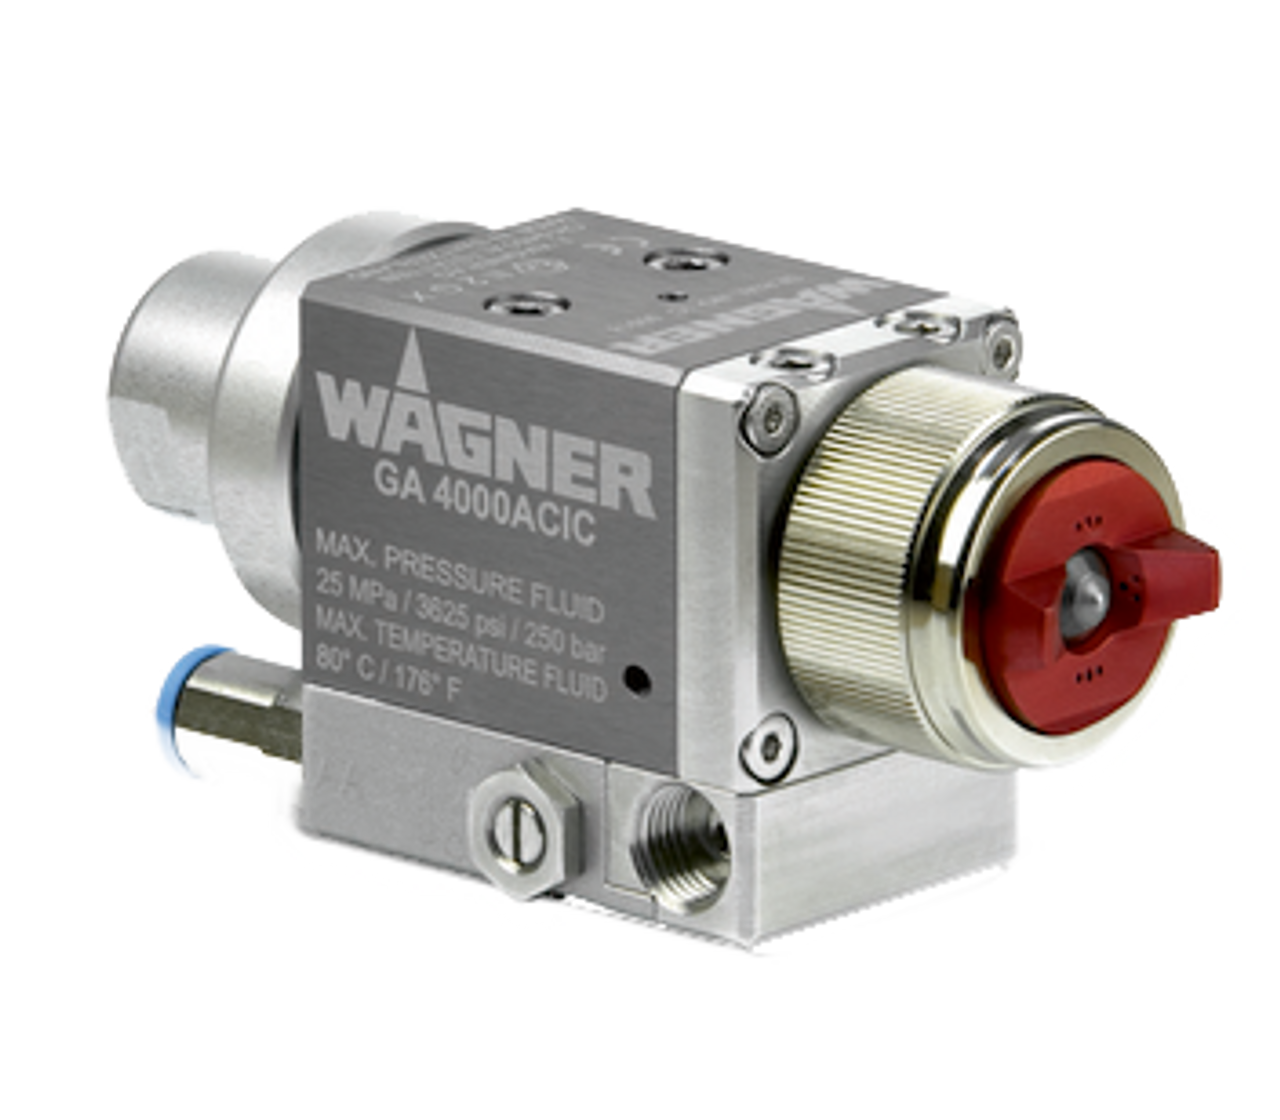 Wagner airless